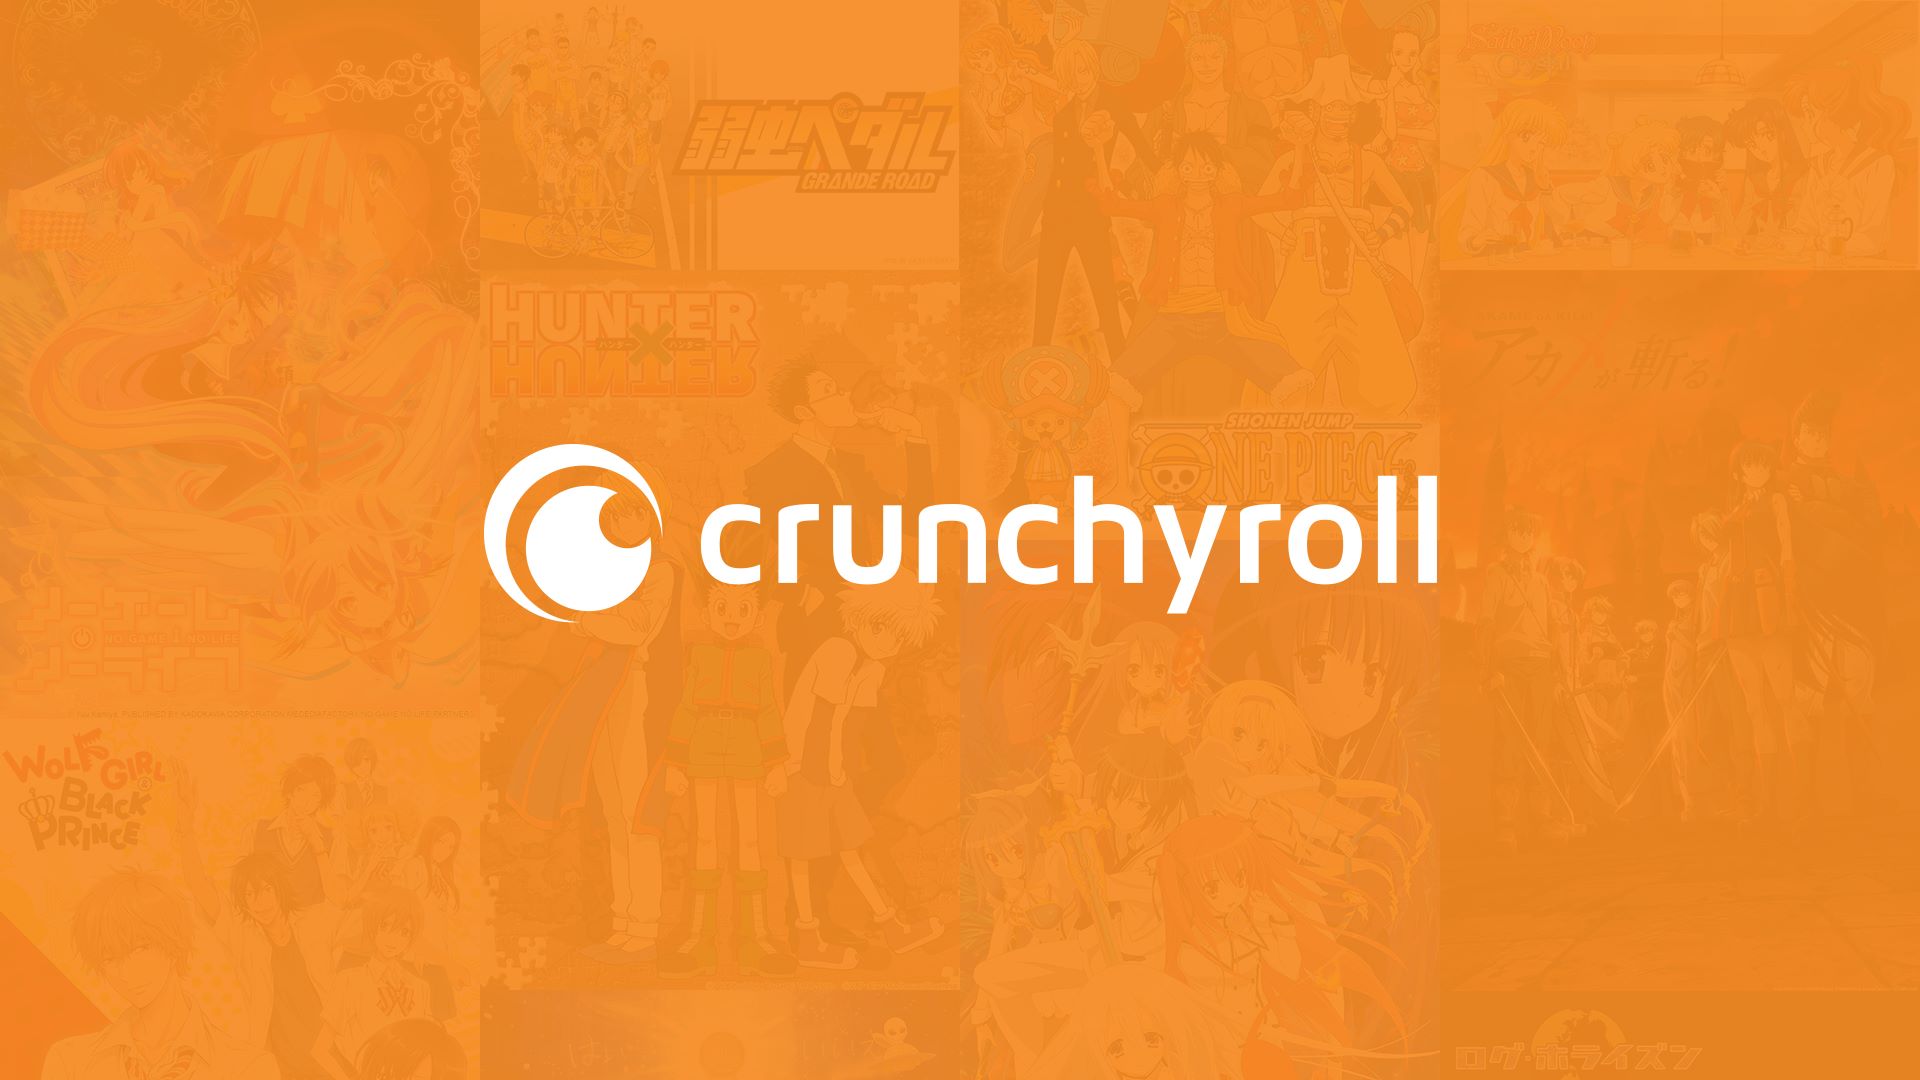 Sony acquires anime streaming service Crunchyroll for $1.175 billion